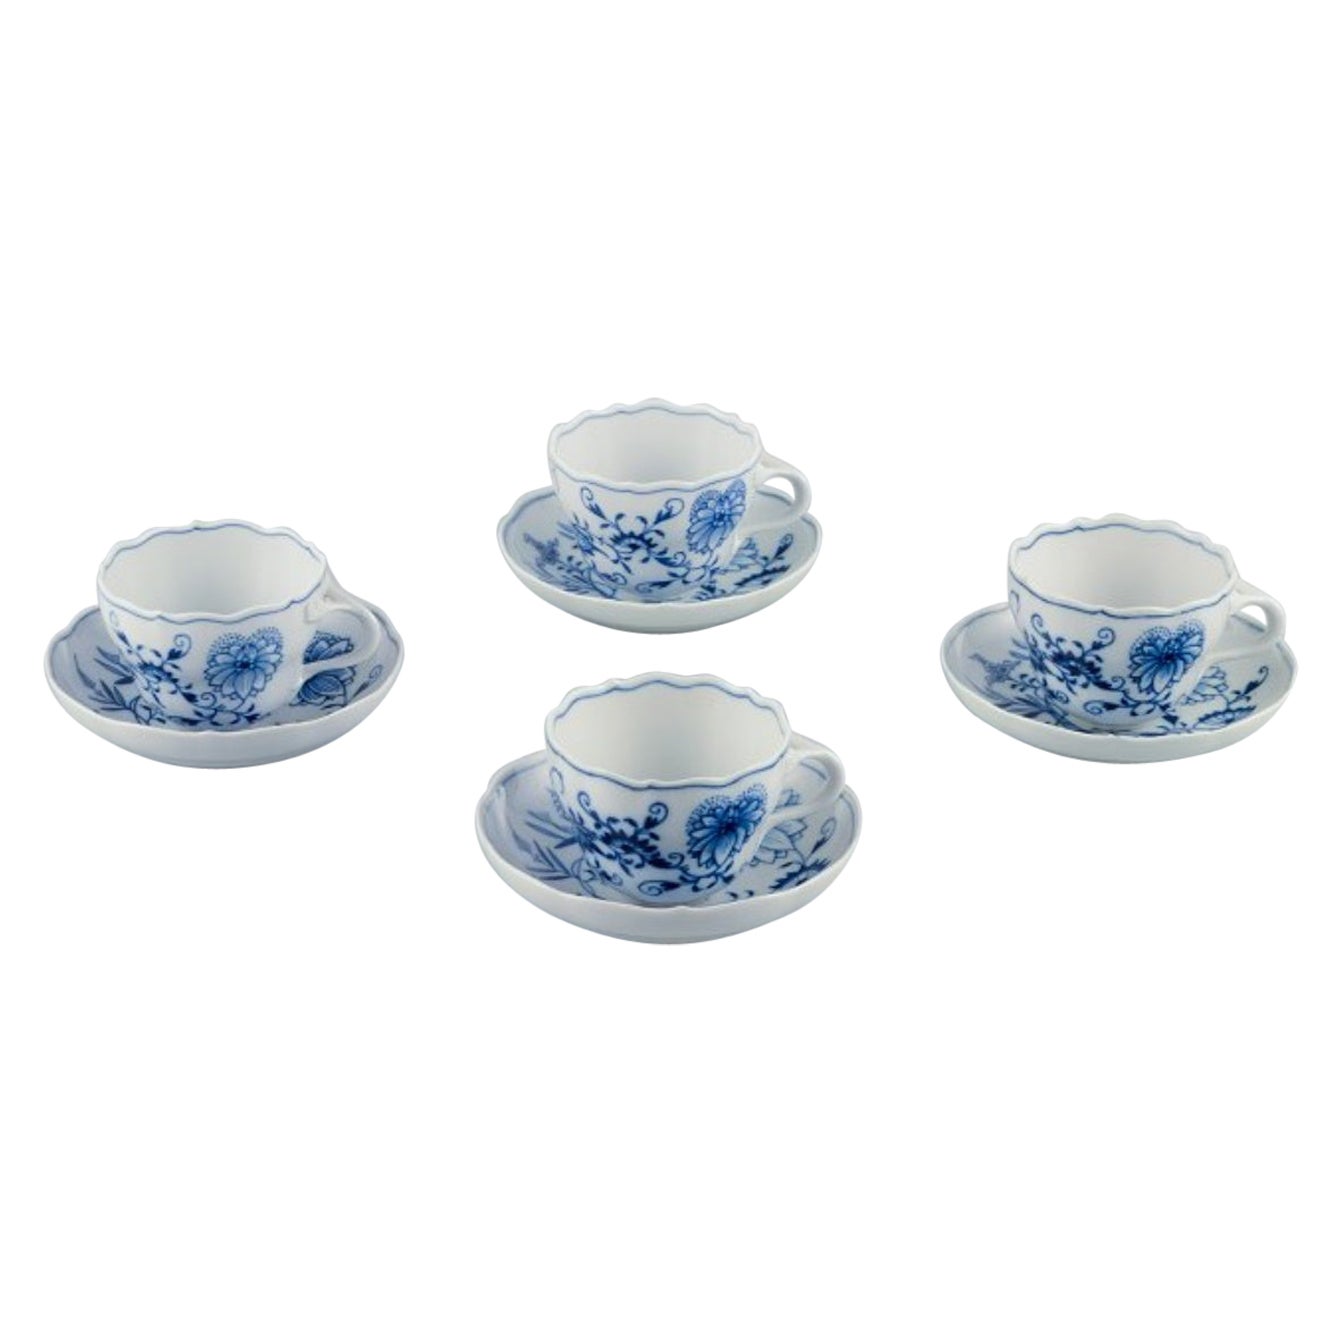 Meissen, Germany. Four Blue Onion coffee cups with saucers in porcelain.